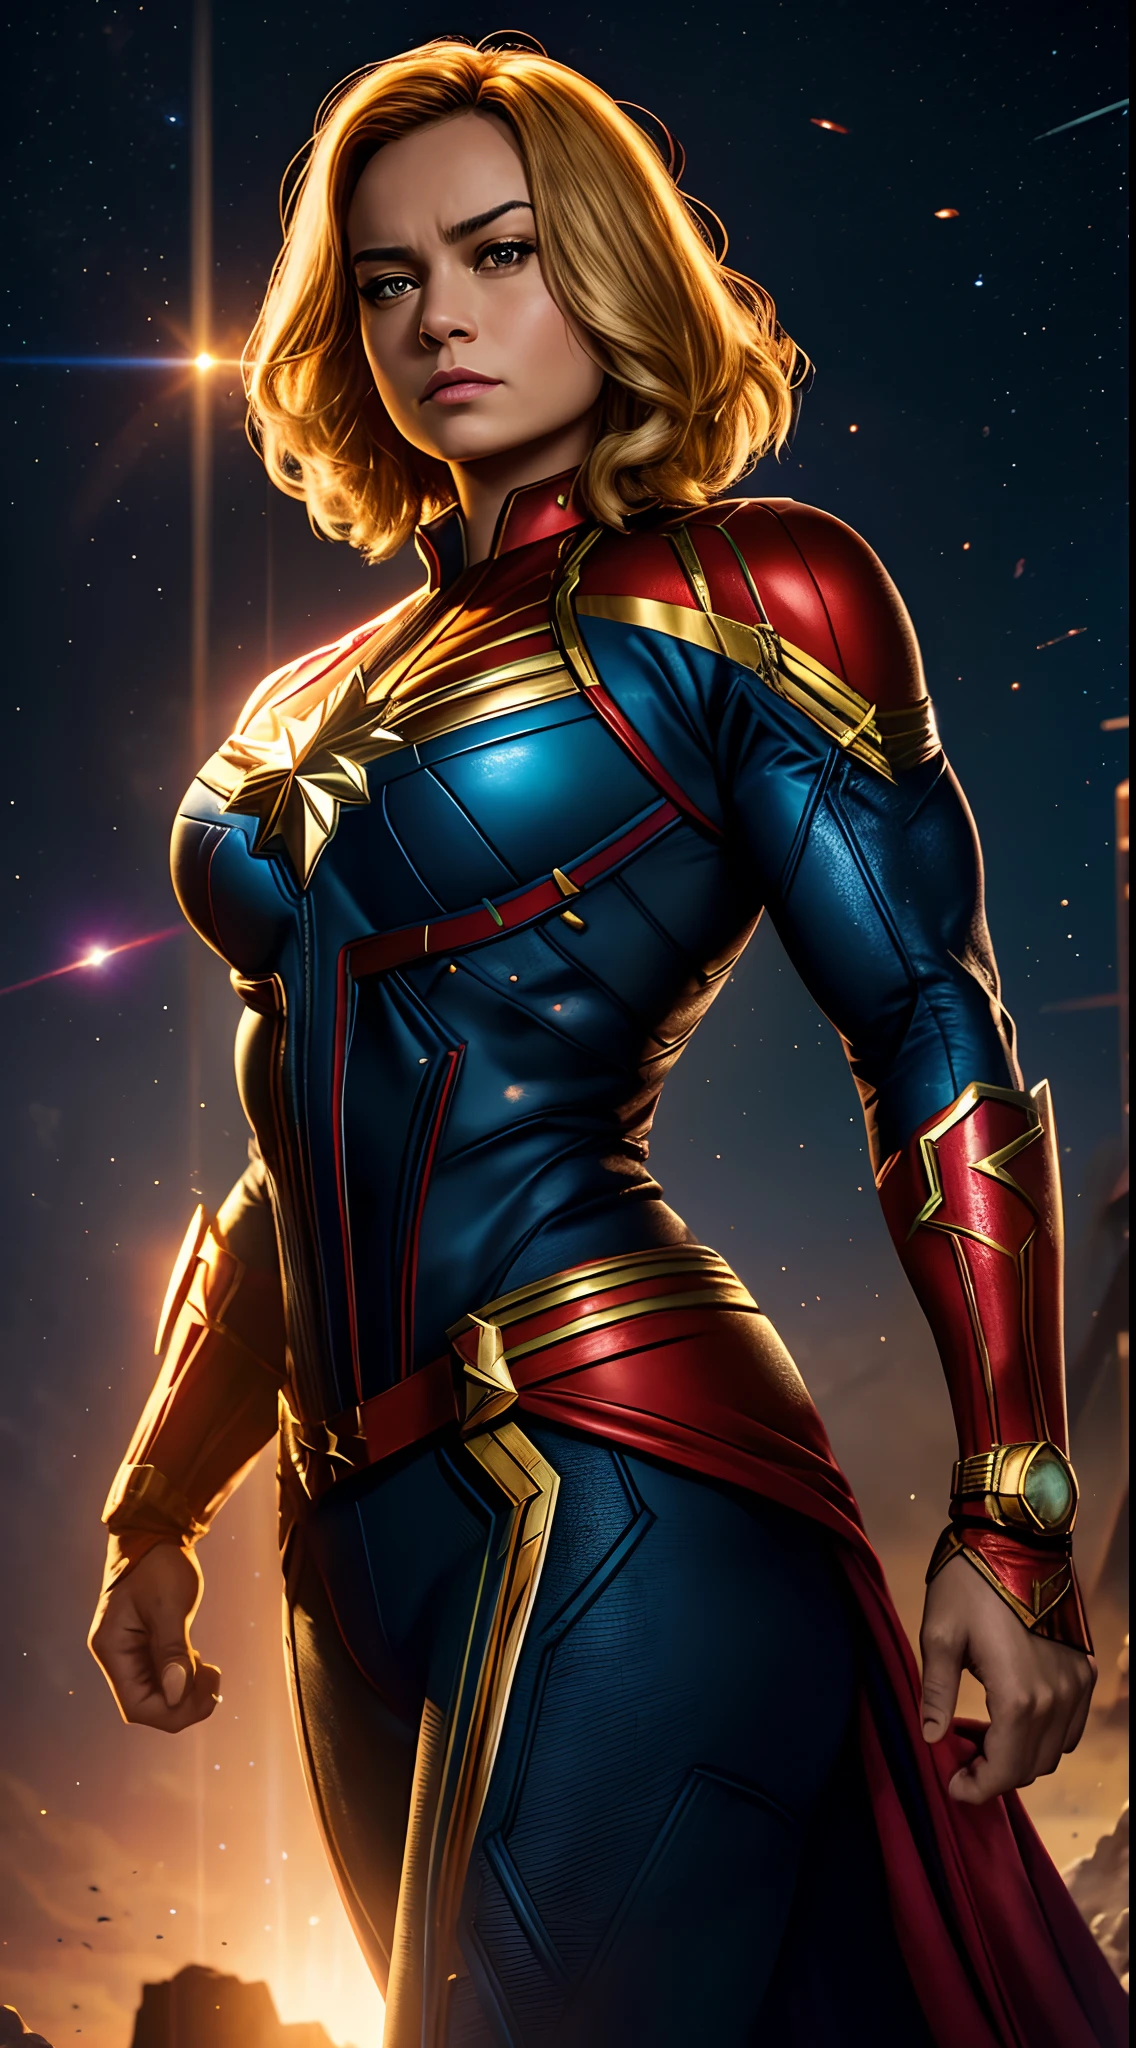 Captain Marvel marvel ,Bodybuilder, super strong, muscular, ABS, in background galaxy35mm lens, photography, ultra details, HDR, UHD,8K